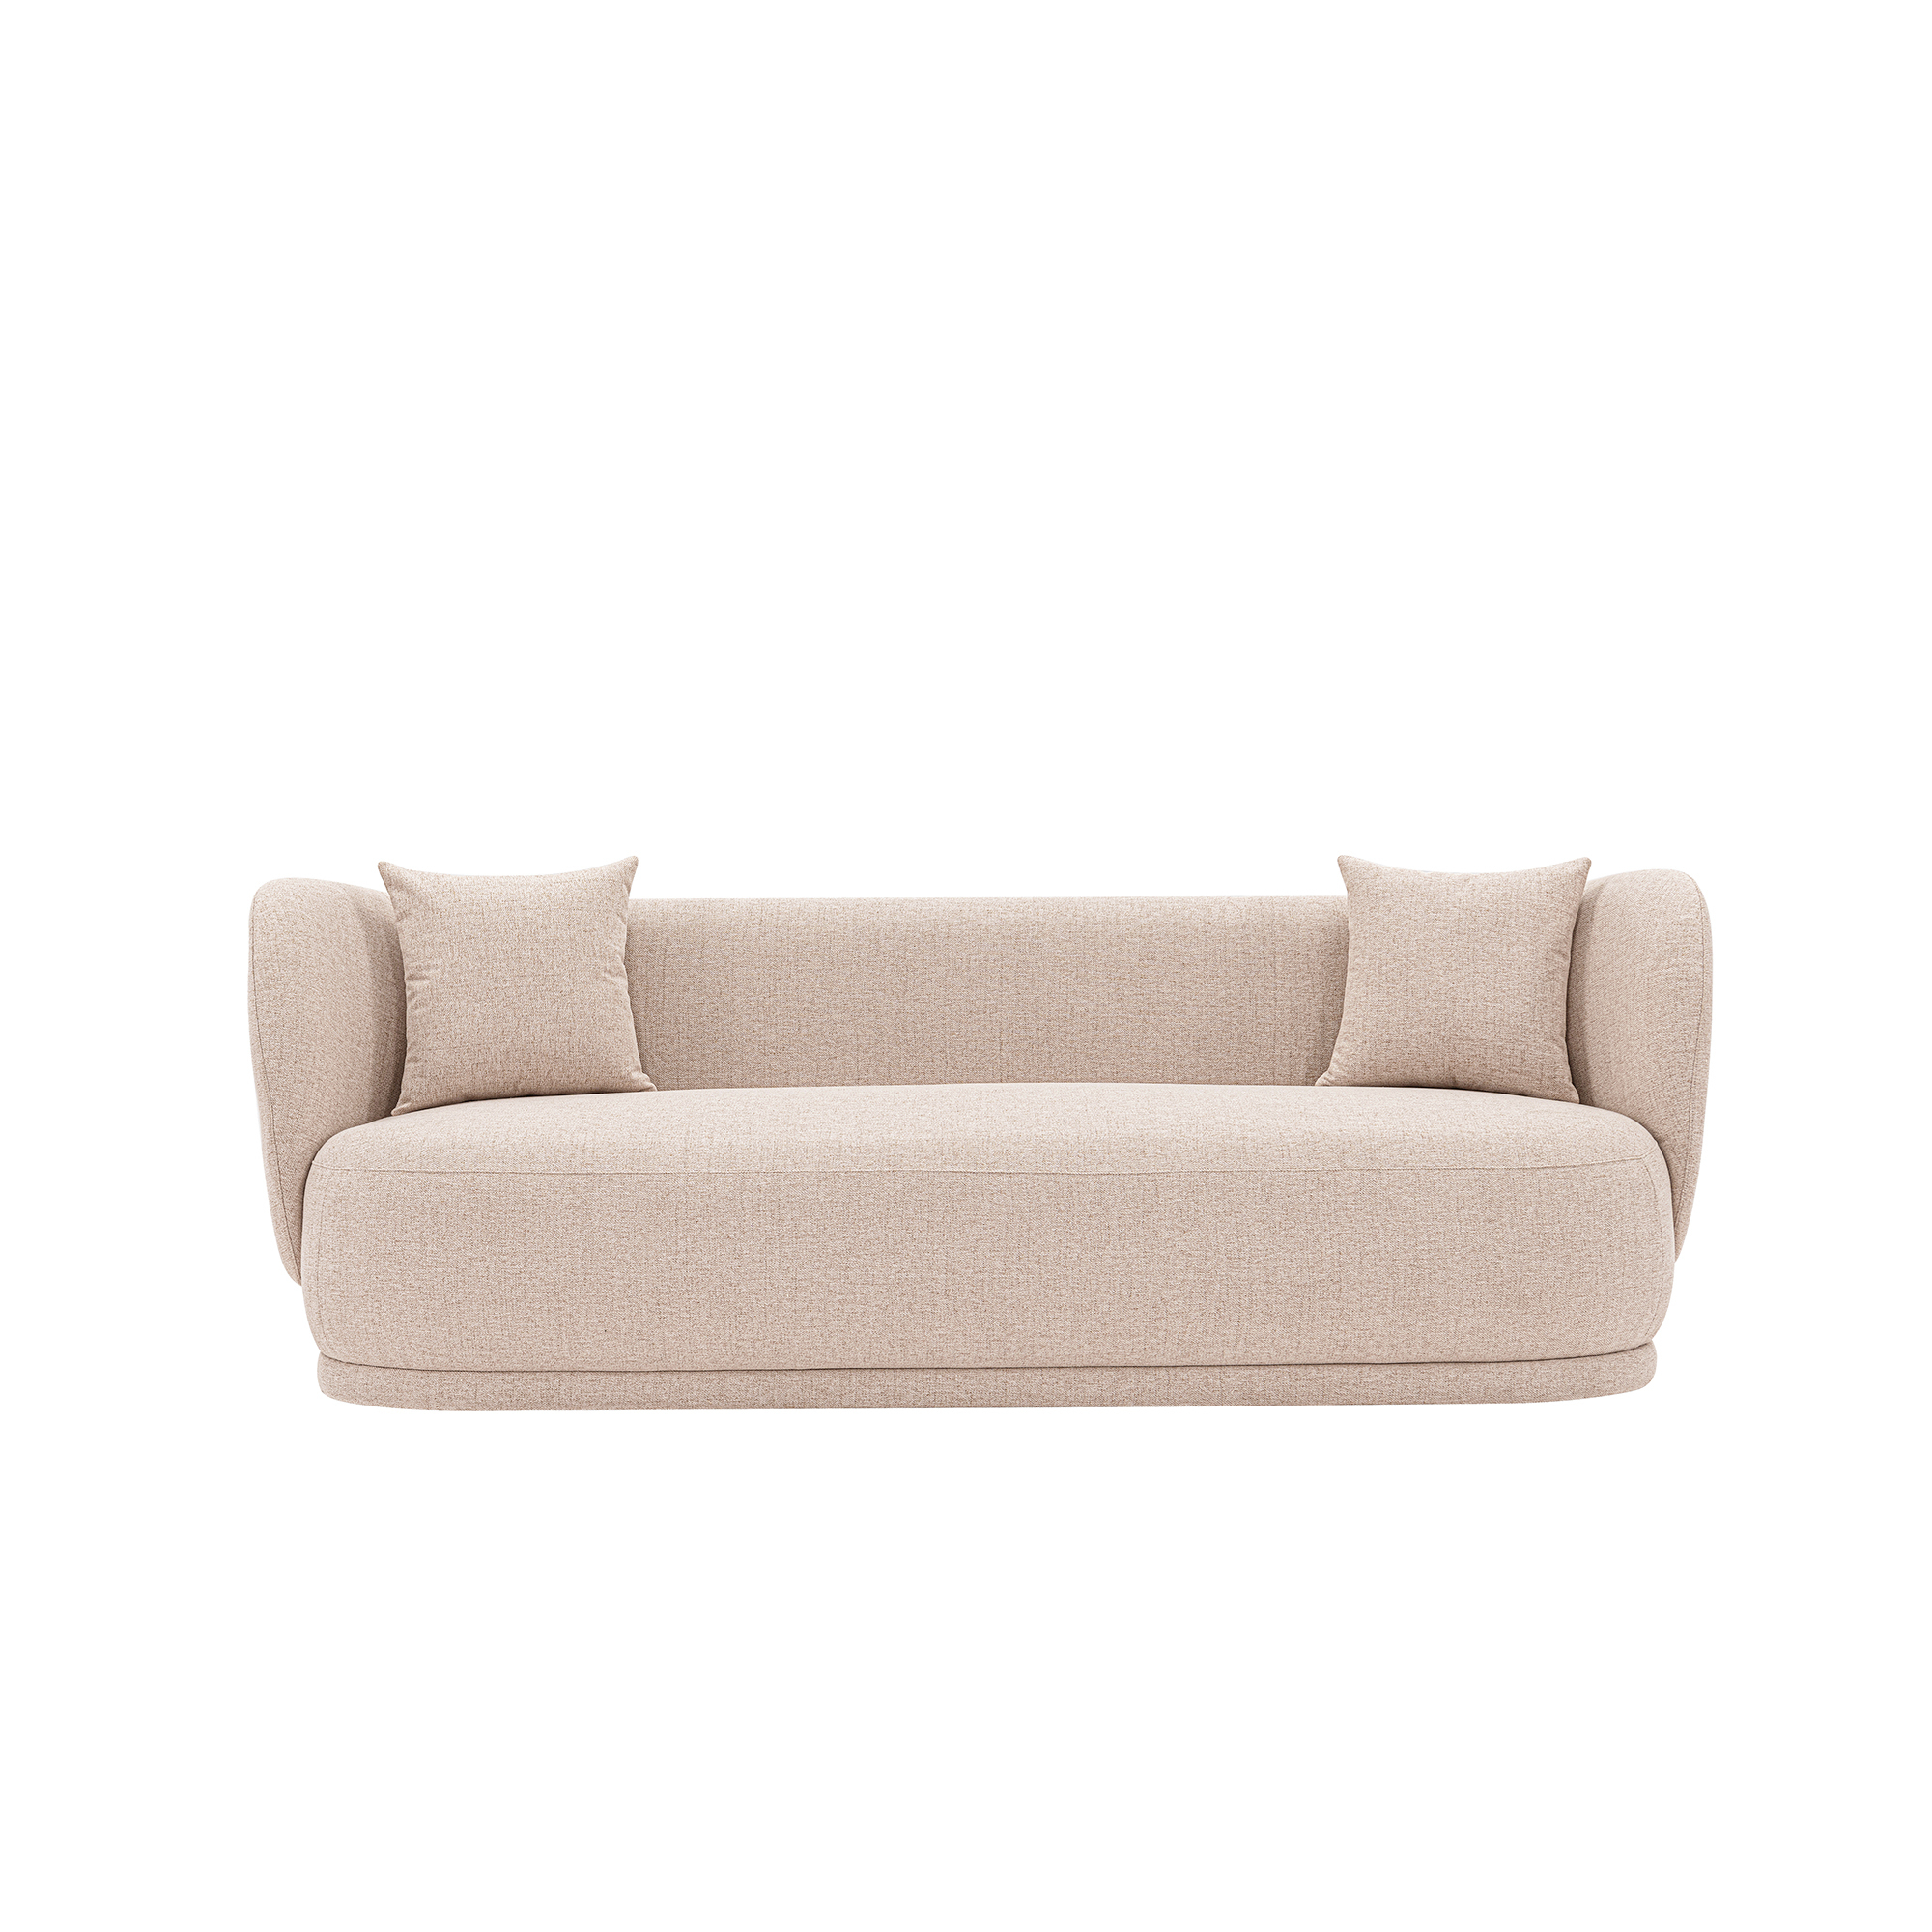 Manhattan Comfort, Contemporary Siri Linen Sofa with Pillows in Wheat, Primary Color Tan, Included (qty.) 1 Model SF010